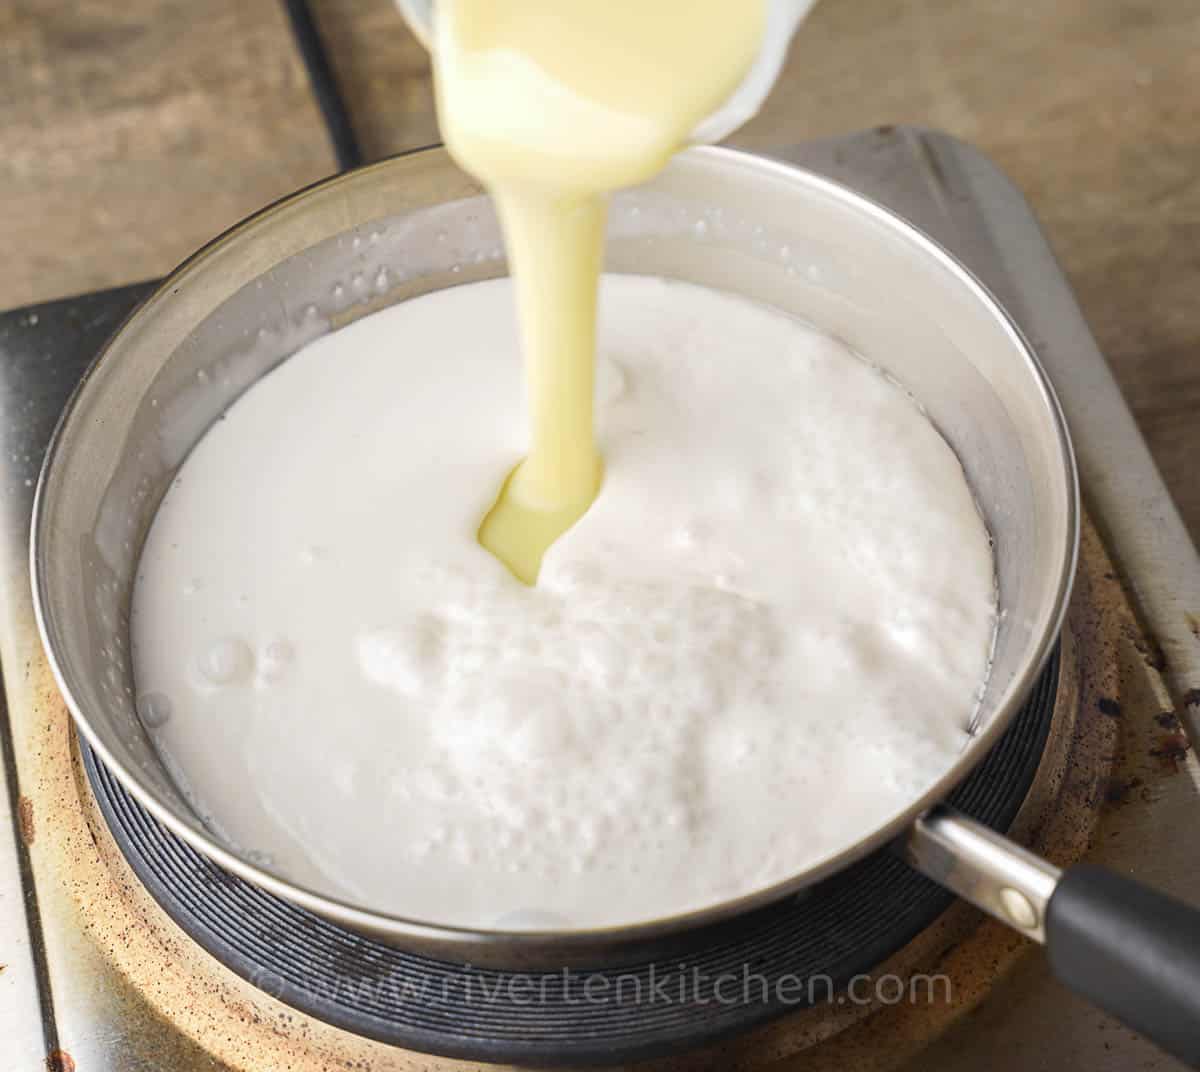 sweet sauce for dessert made of coconut milk and condensed milk.